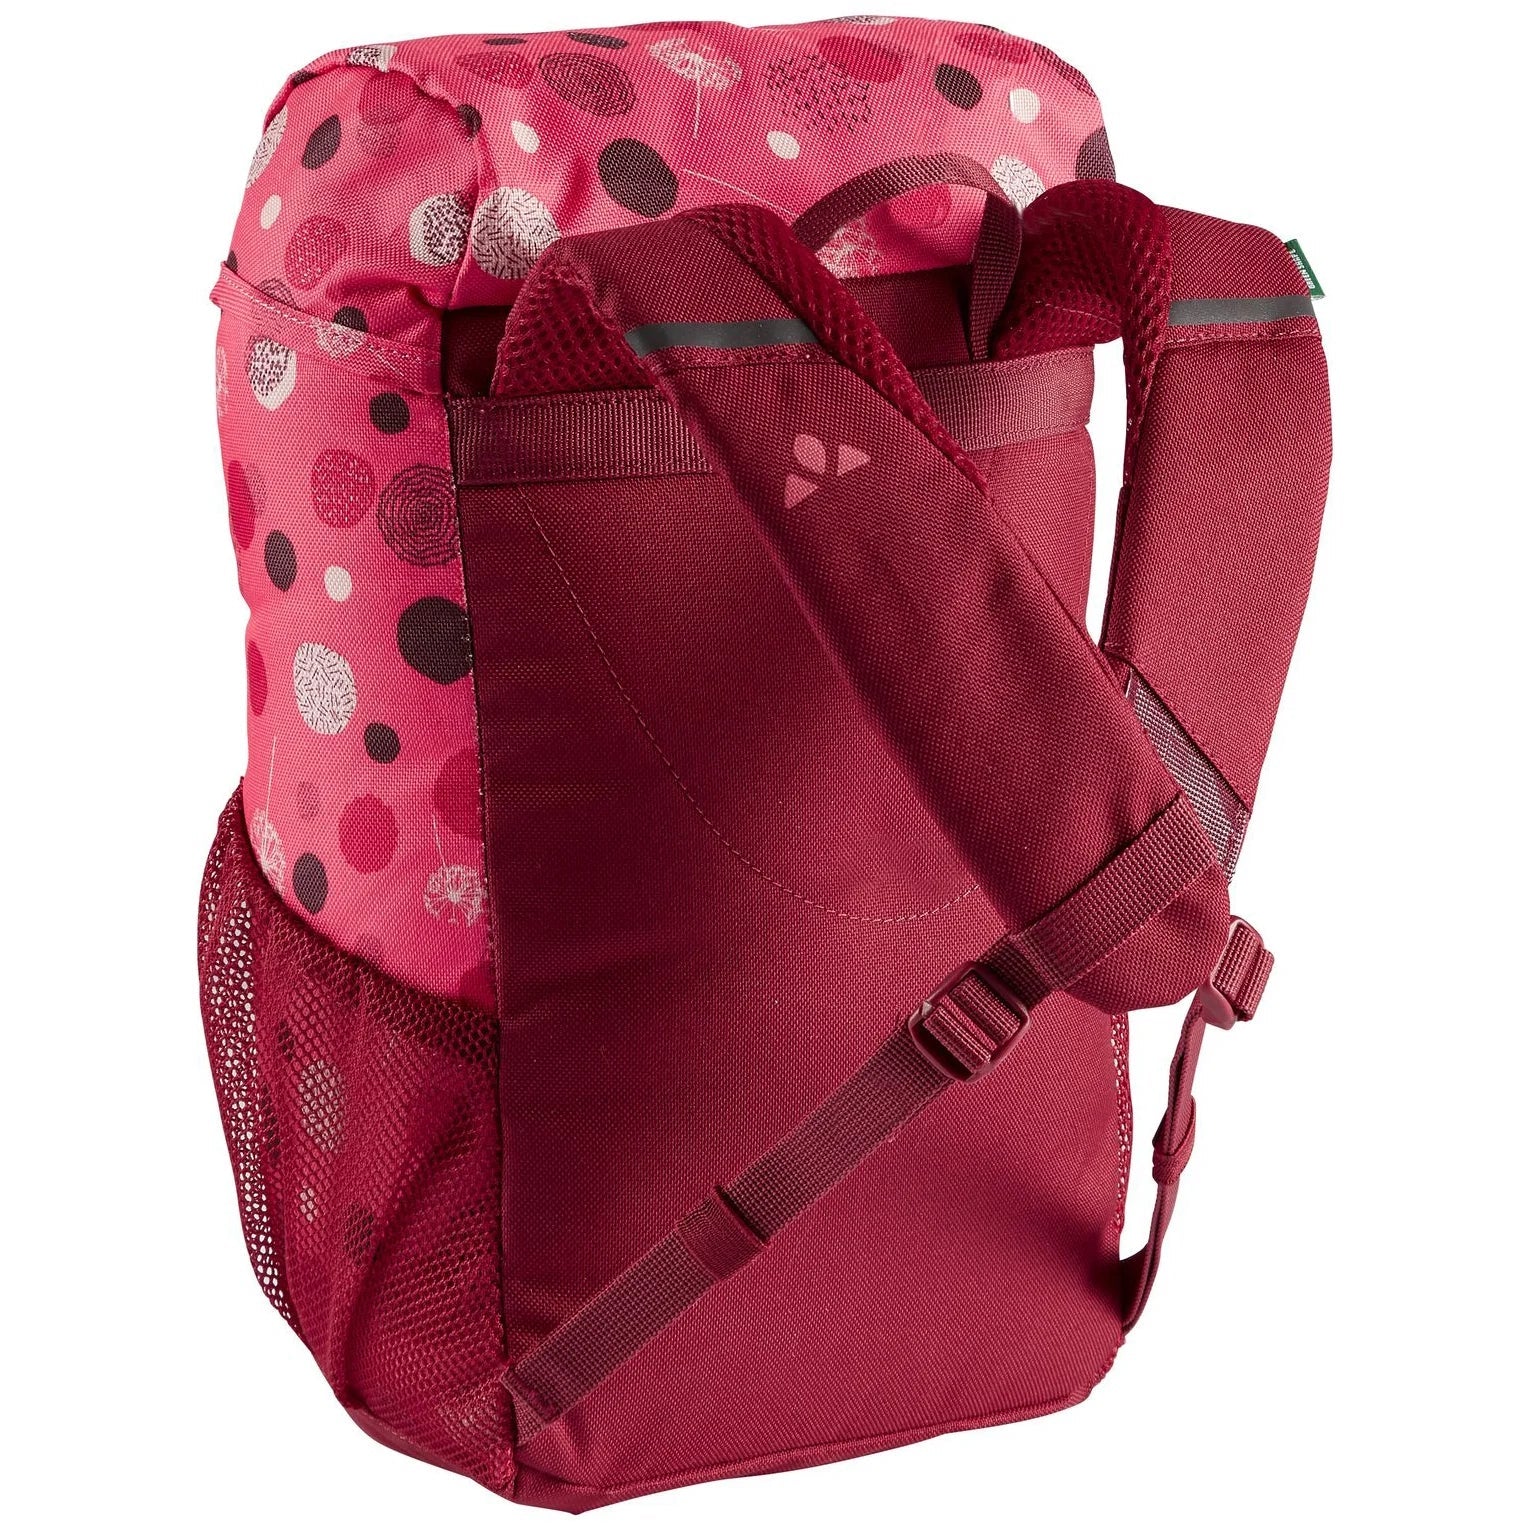 Vaude Family Ayla 6 children's backpack 30 cm - bright pink-cranberry